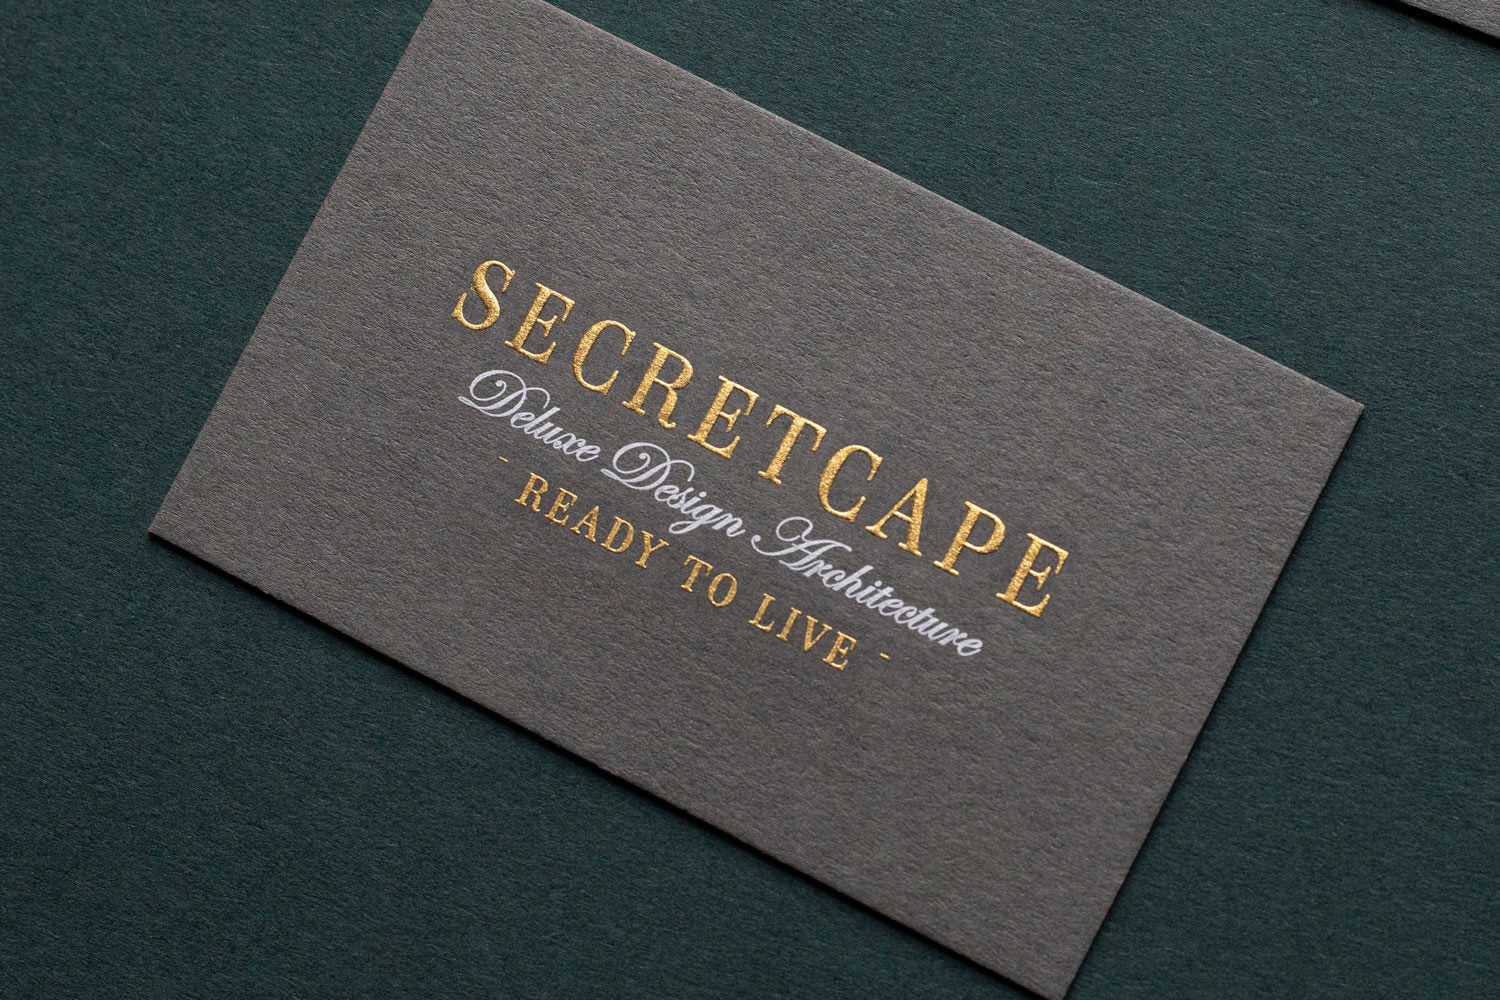 luxury stationery die stamped in gold with white text on grey card